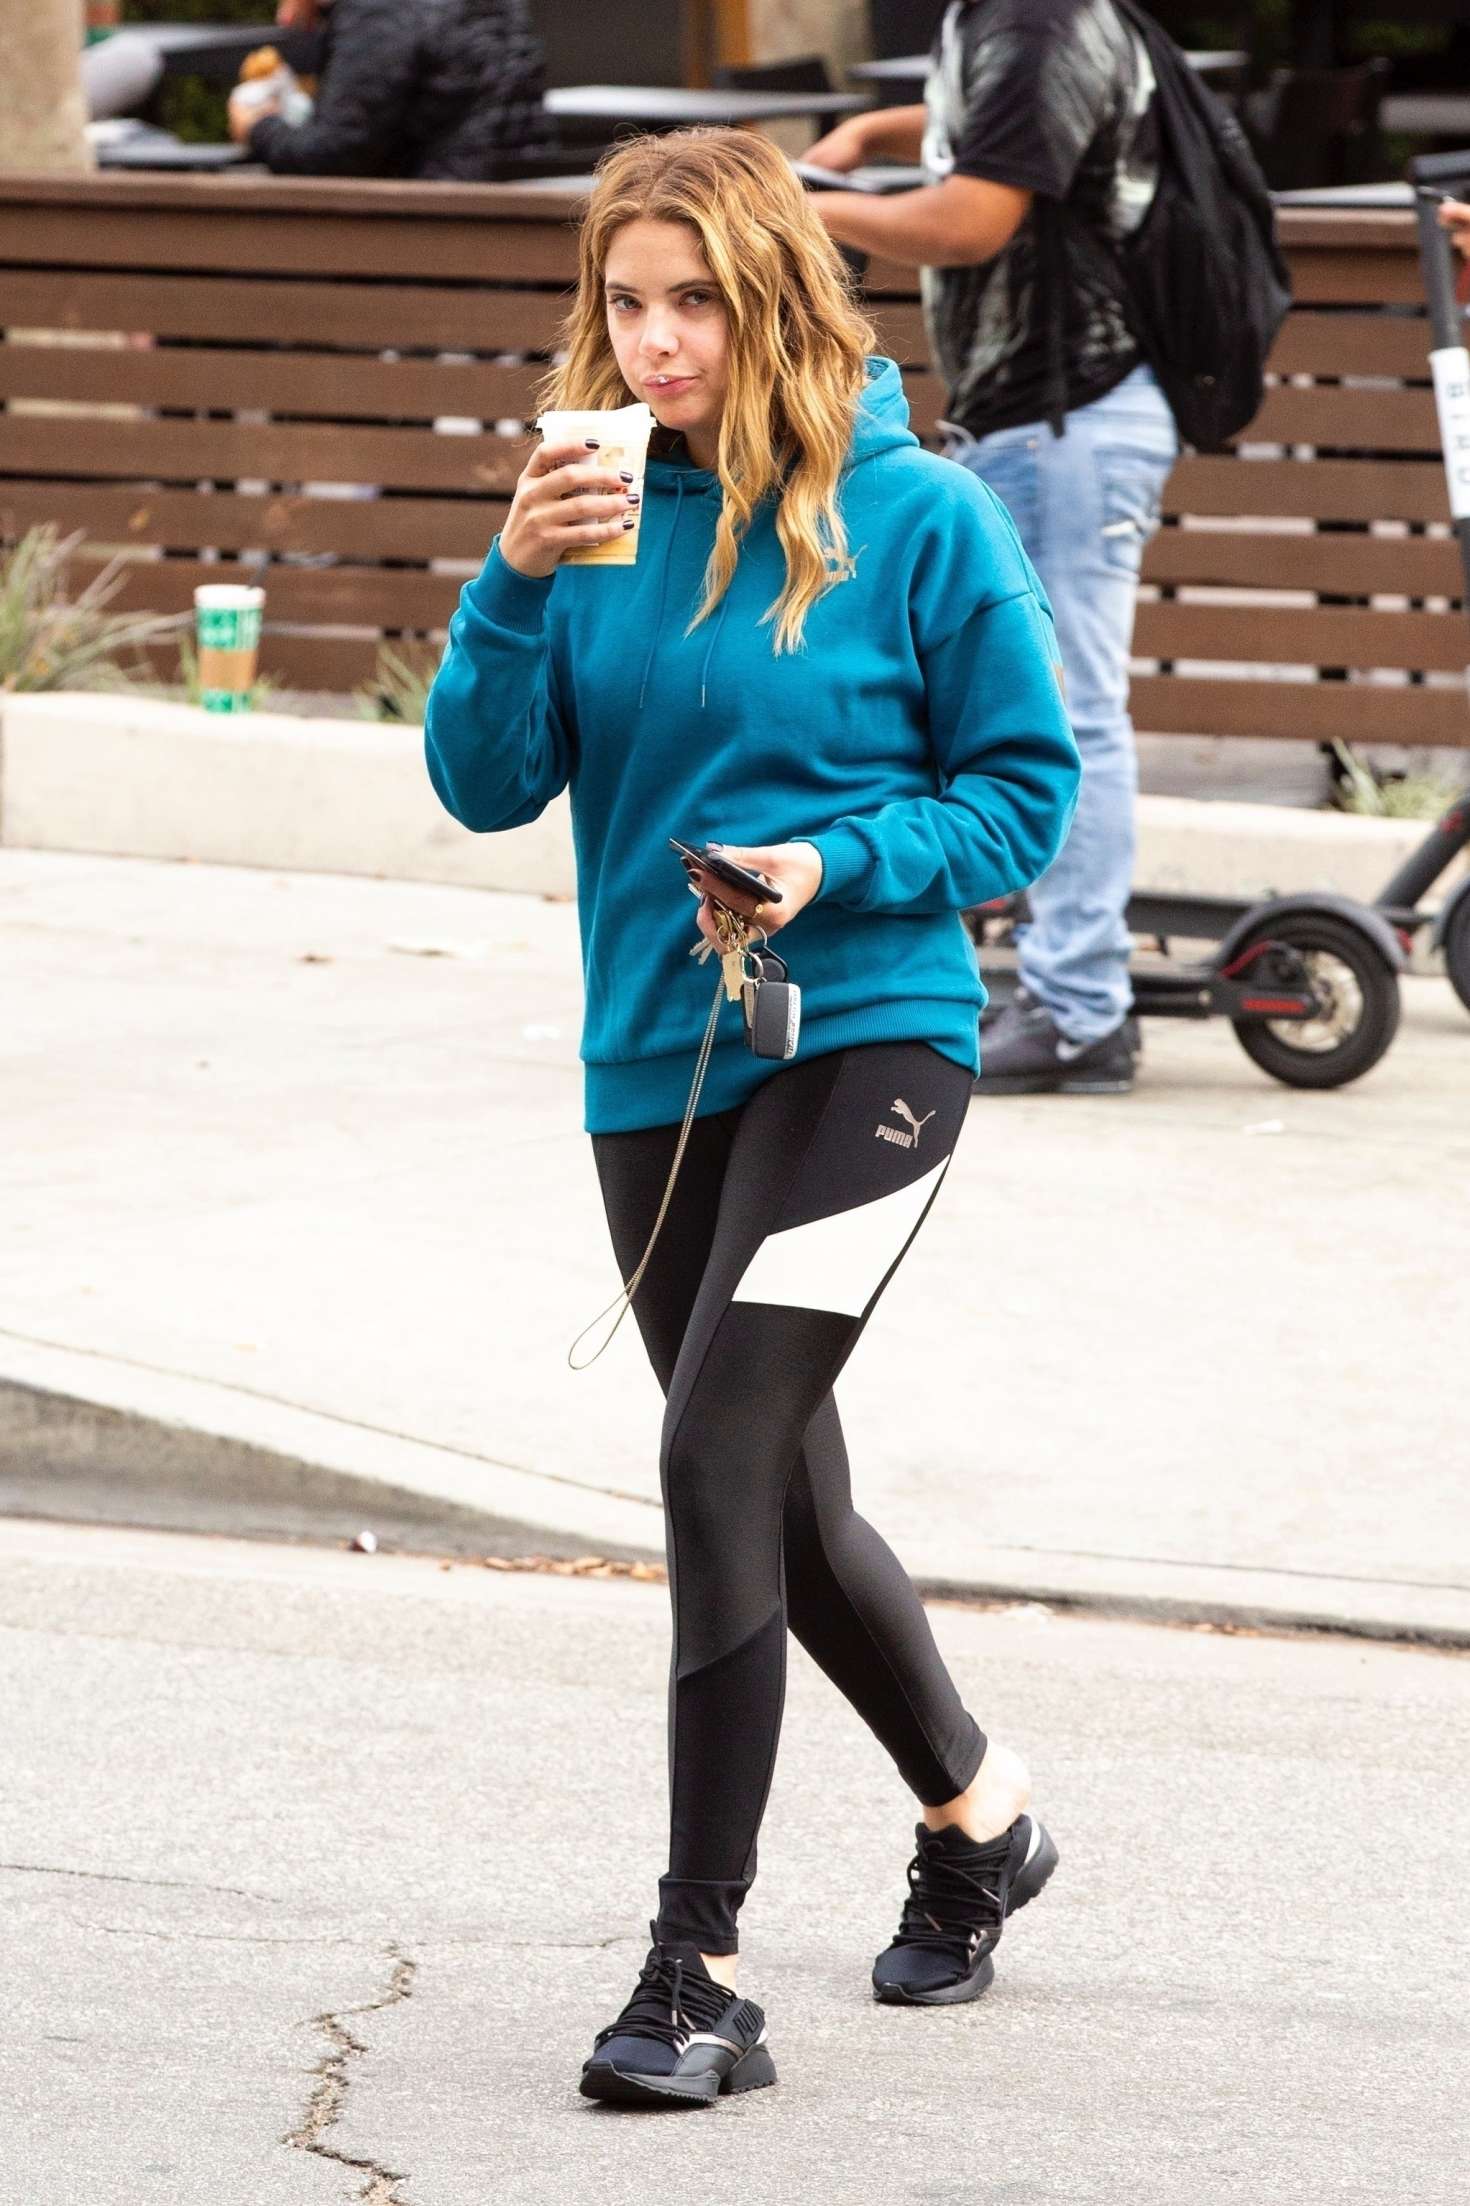 Ashley Benson â€“ Grabs her morning coffee in Los Angeles